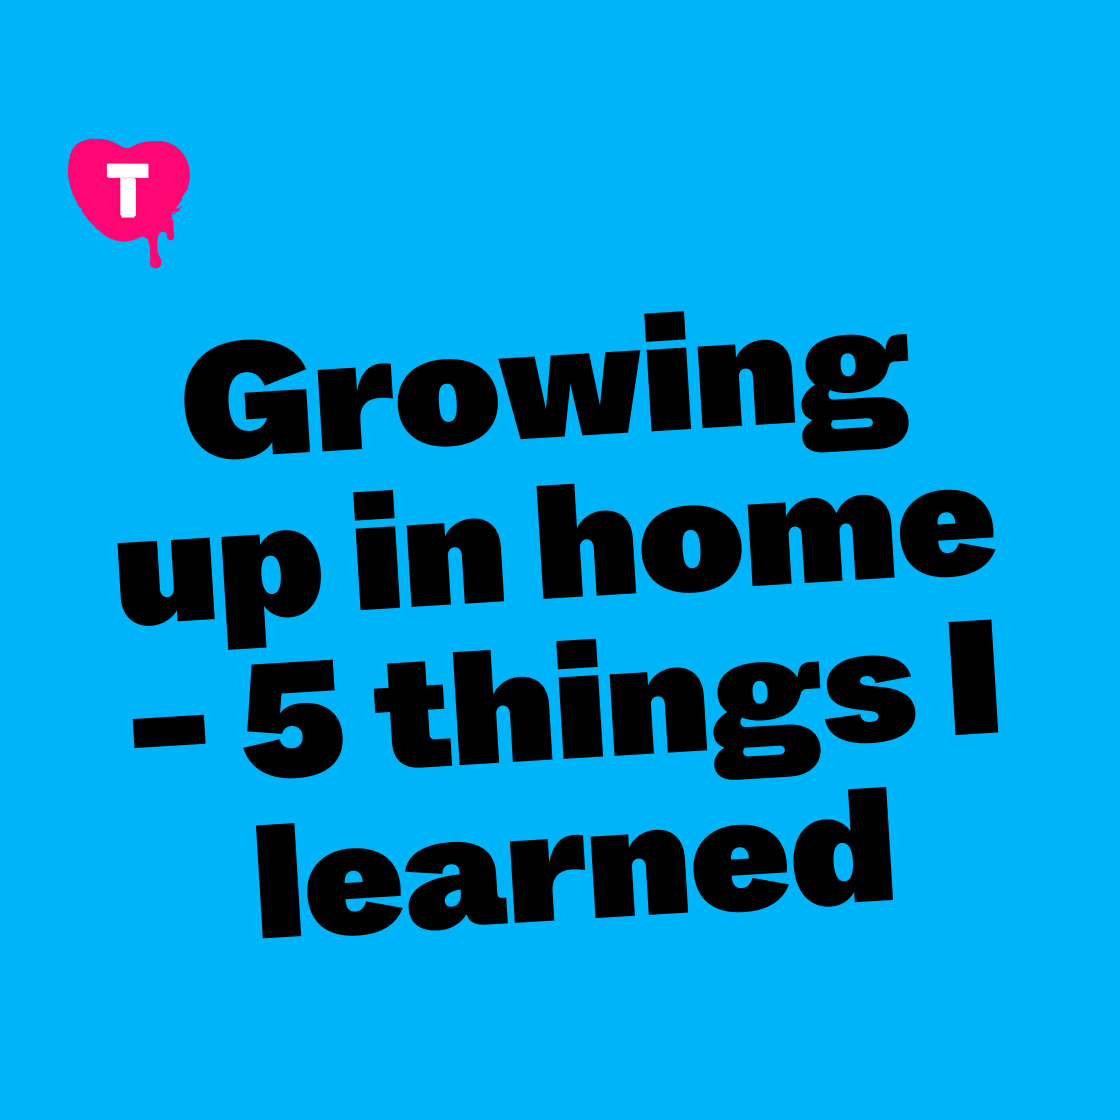 Growing up in the home - 5 things I learned